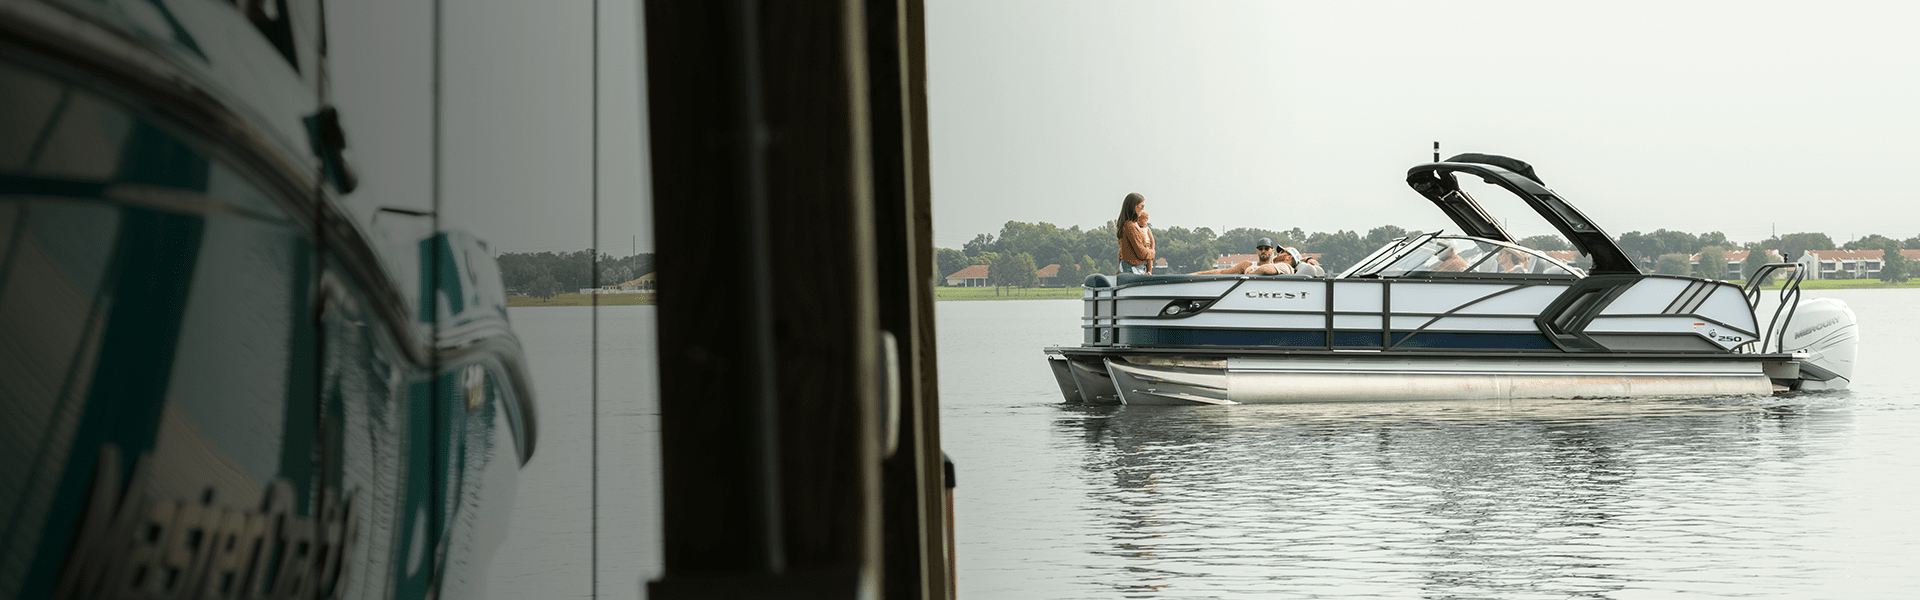 How to enjoy life on the water in cooler temperatures